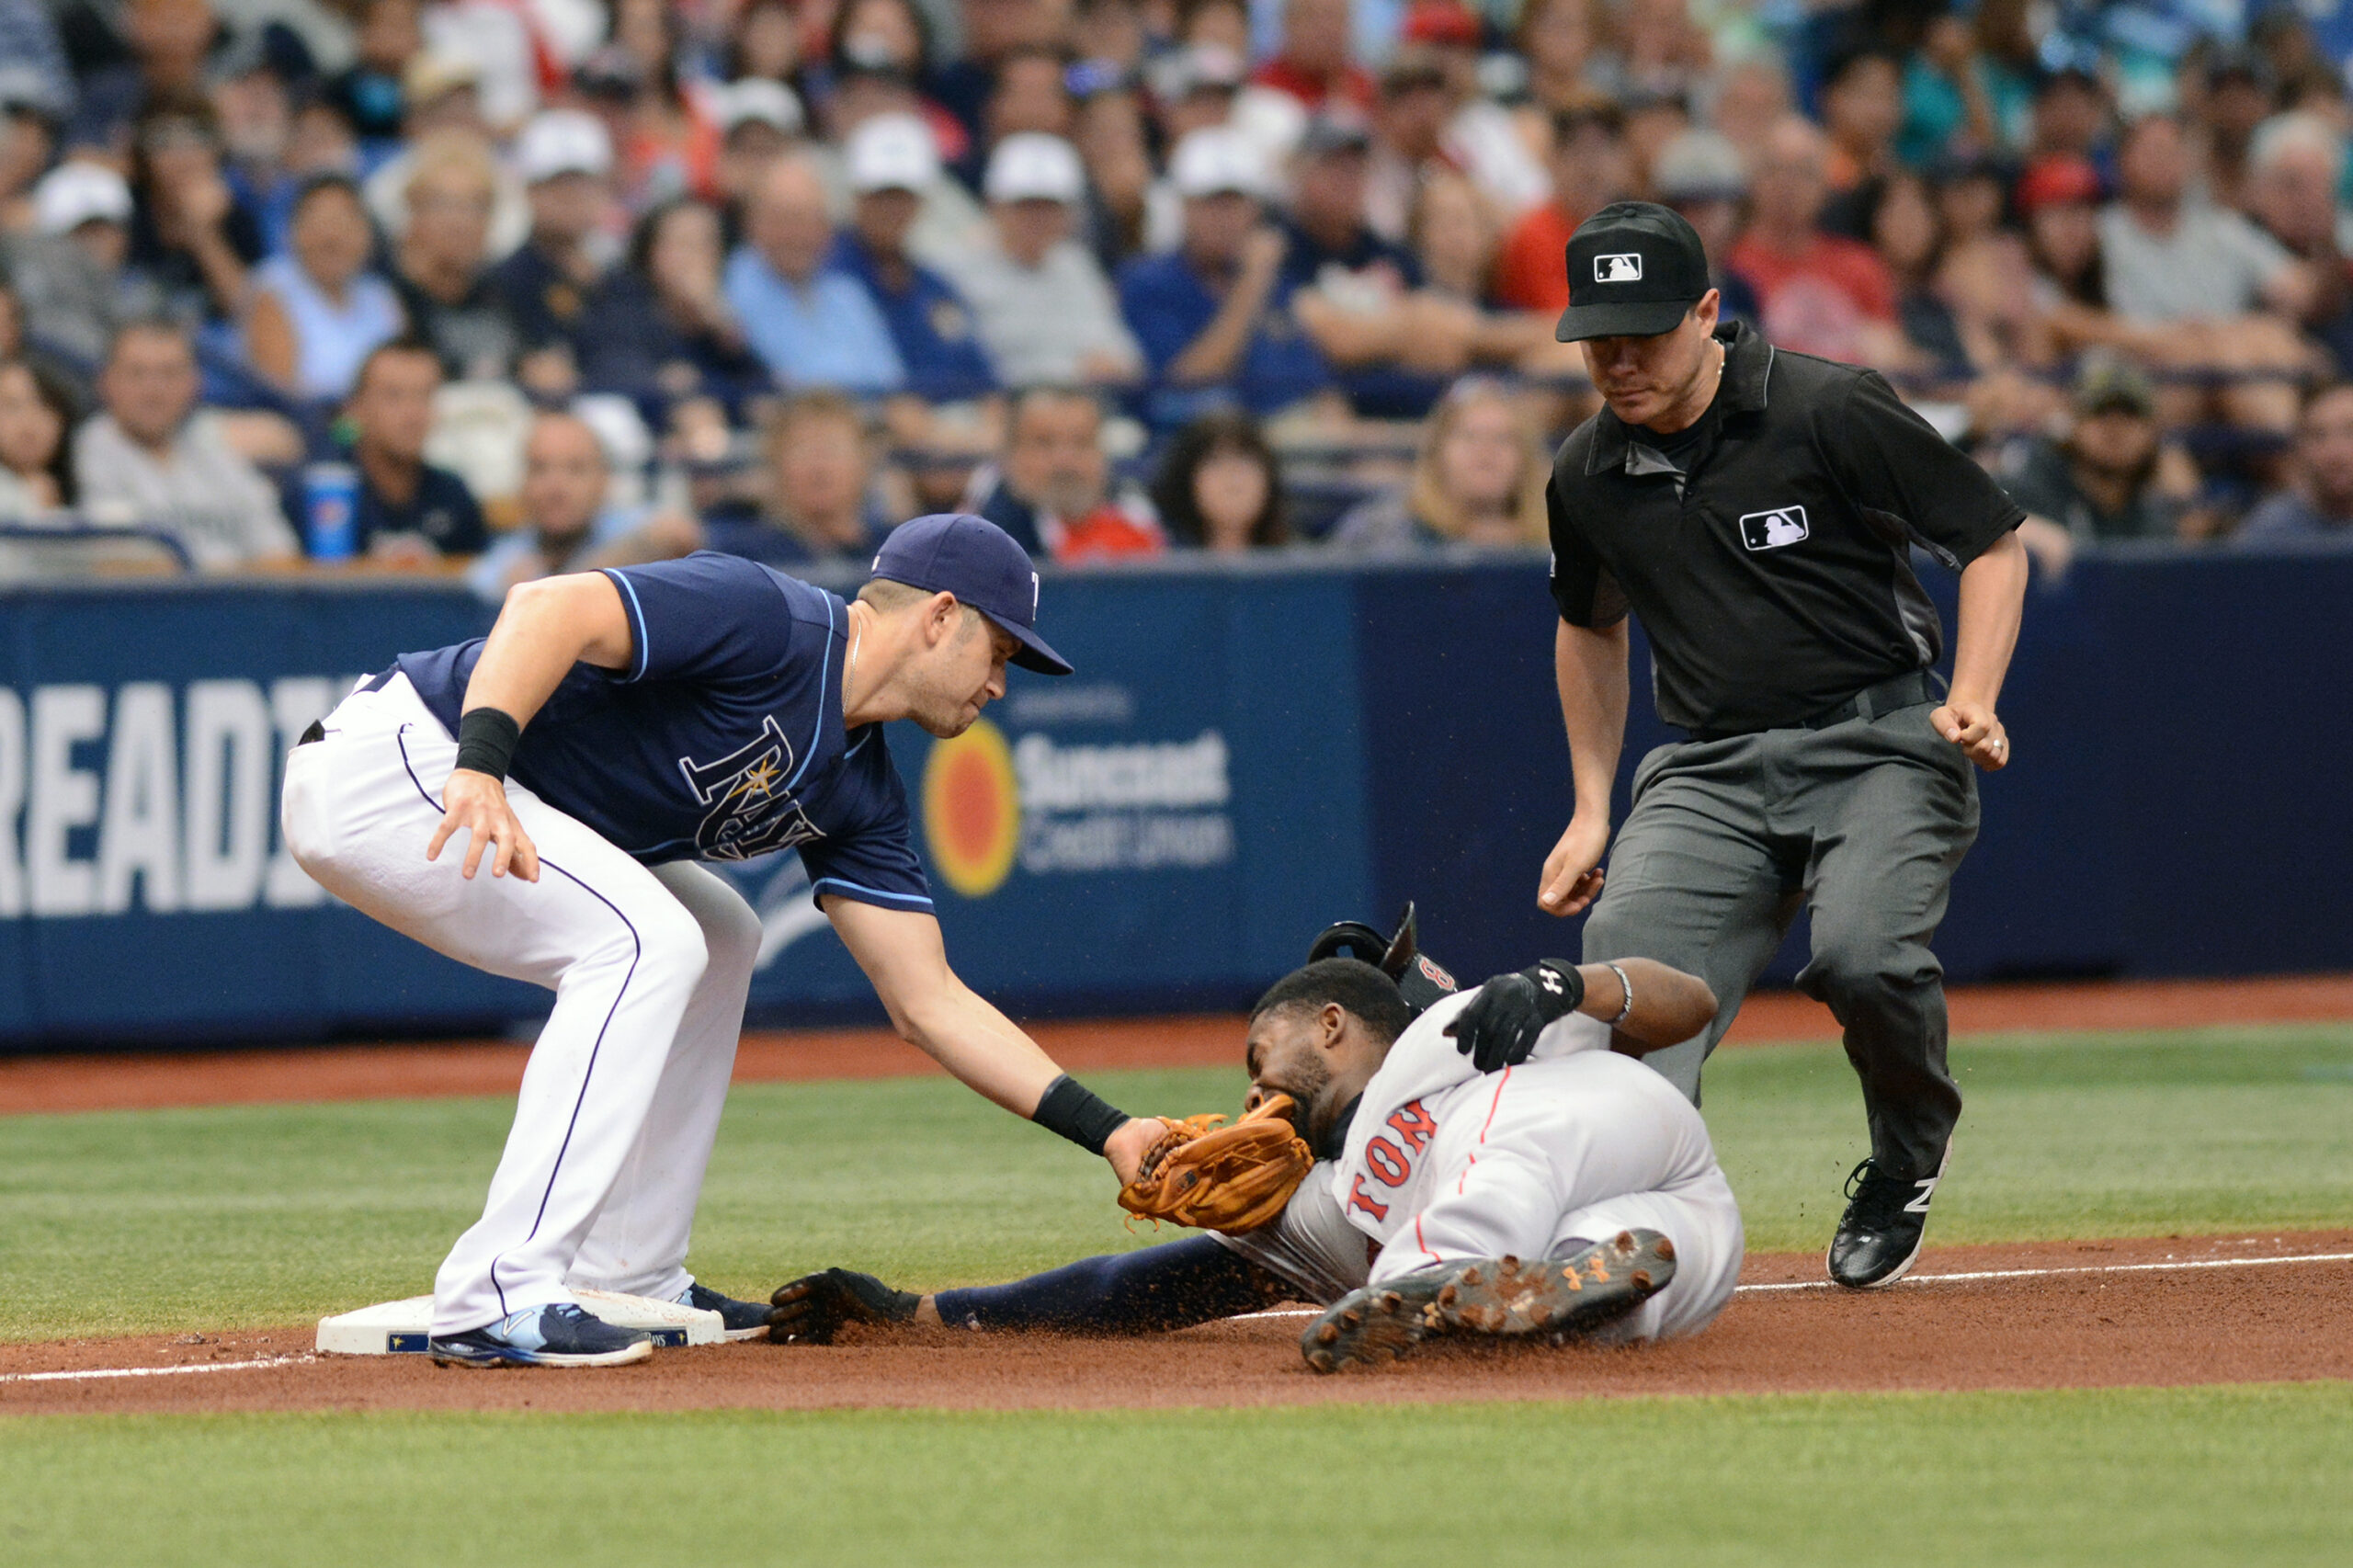 Tampa Bay Rays third baseman Evan Longoria (3) tags Boston Red Sox center fielder Jackie Bradley Jr. (25) to close the top of the fifth inning on Wednesday, June 29, 2016, at Tropicana Field in St. Petersburg, Fla. (Andres Leiva/Tampa Bay Times/TNS)